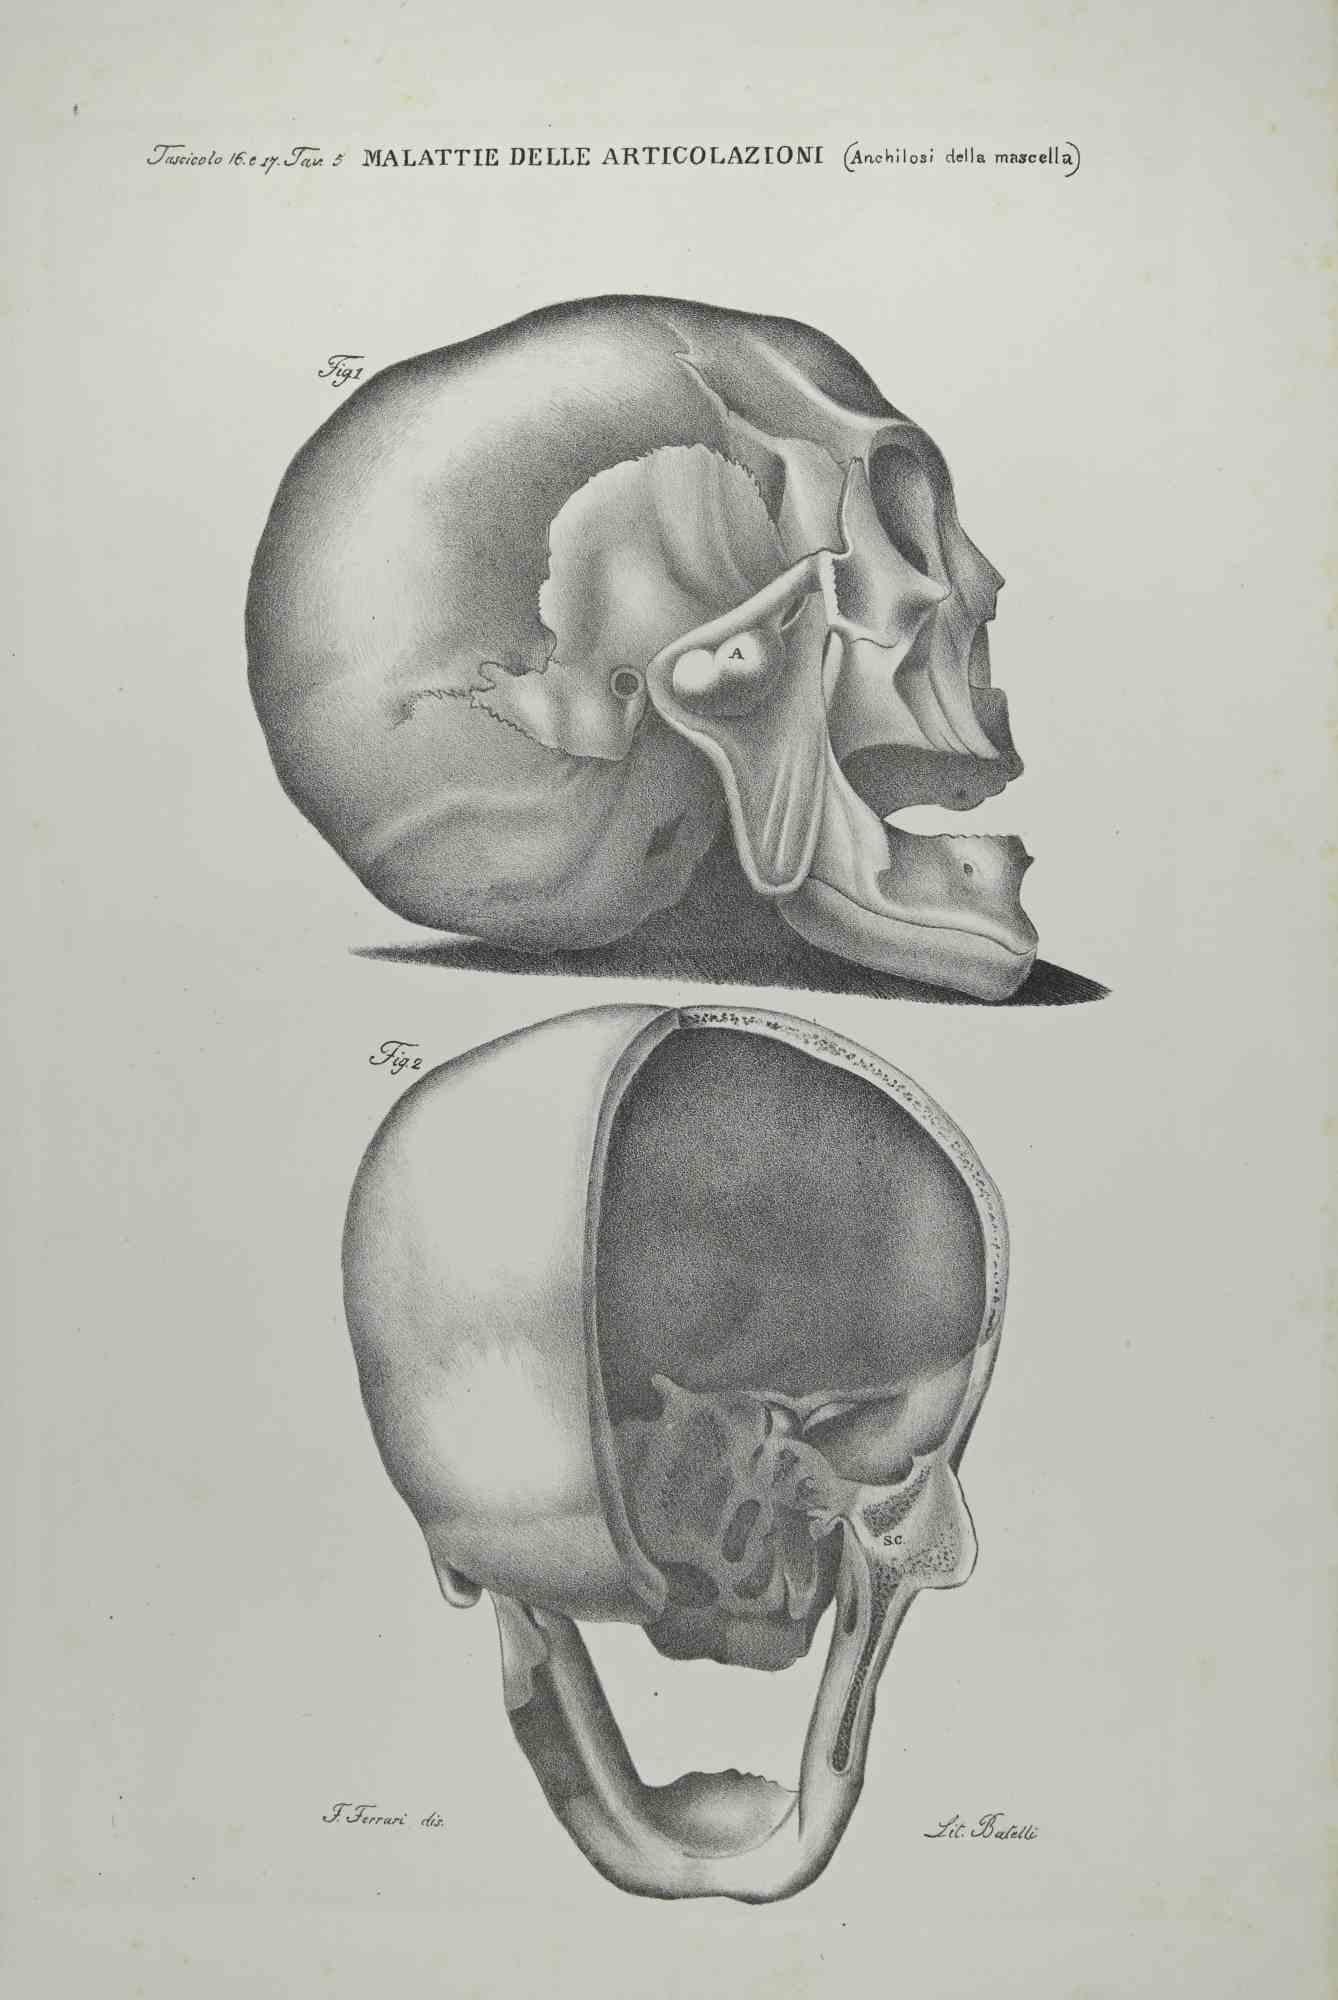 Joint Diseases is a lithograph hand colored by Ottavio Muzzi for the edition of Antoine Chazal, Human Anatomy, Printers Batelli and Ridolfi, 1843.

The work belongs to the Atlante generale della anatomia patologica del corpo umano by Jean